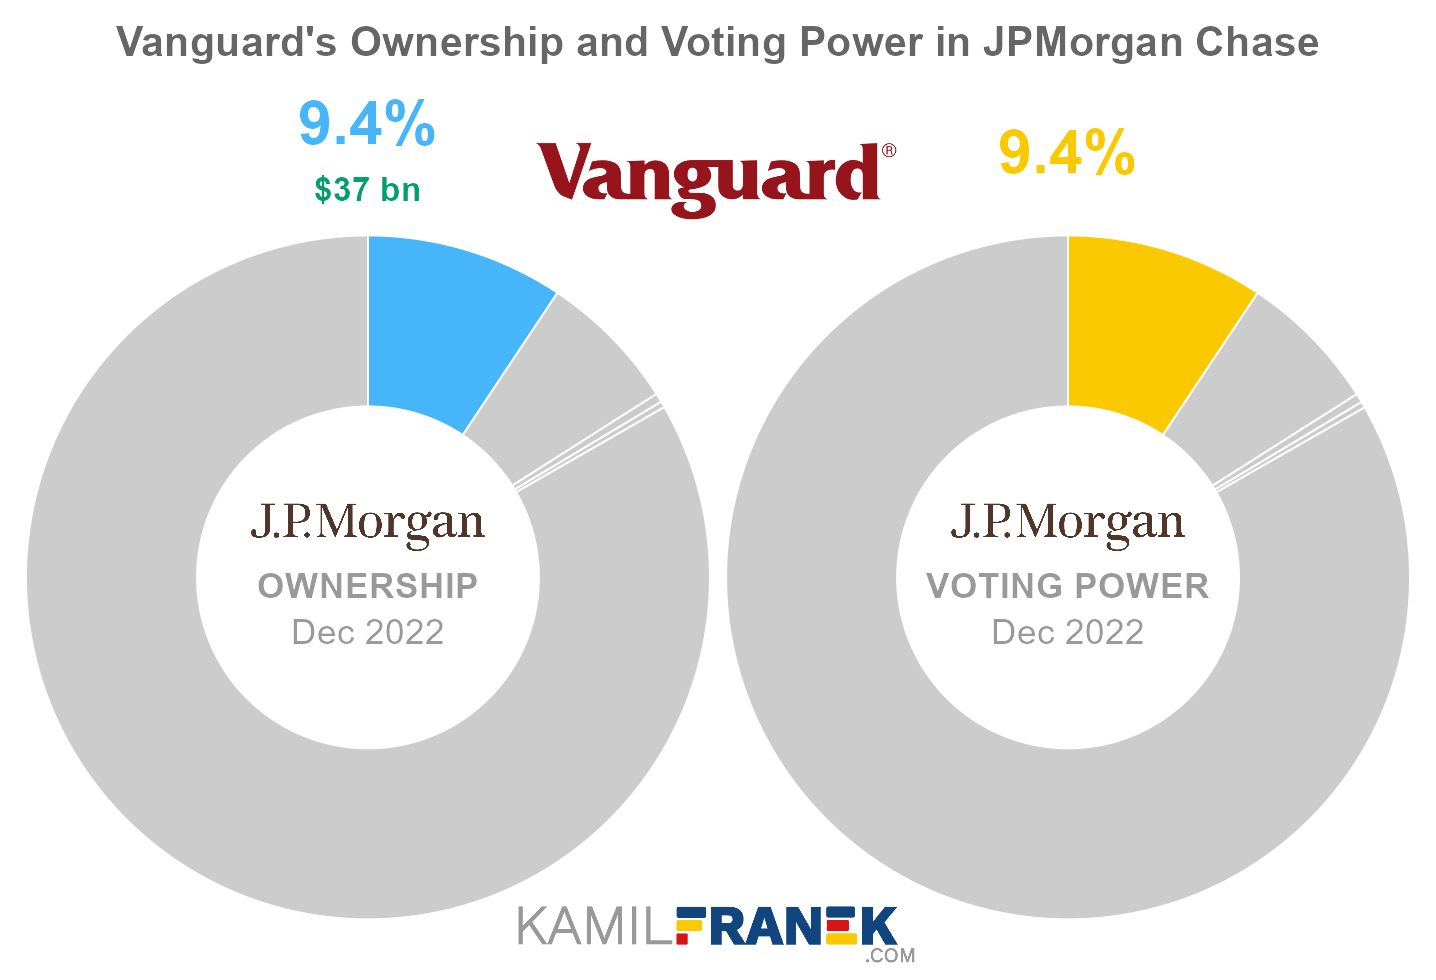 Vanguard's share ownership and voting power in JPMorgan Chase (chart)